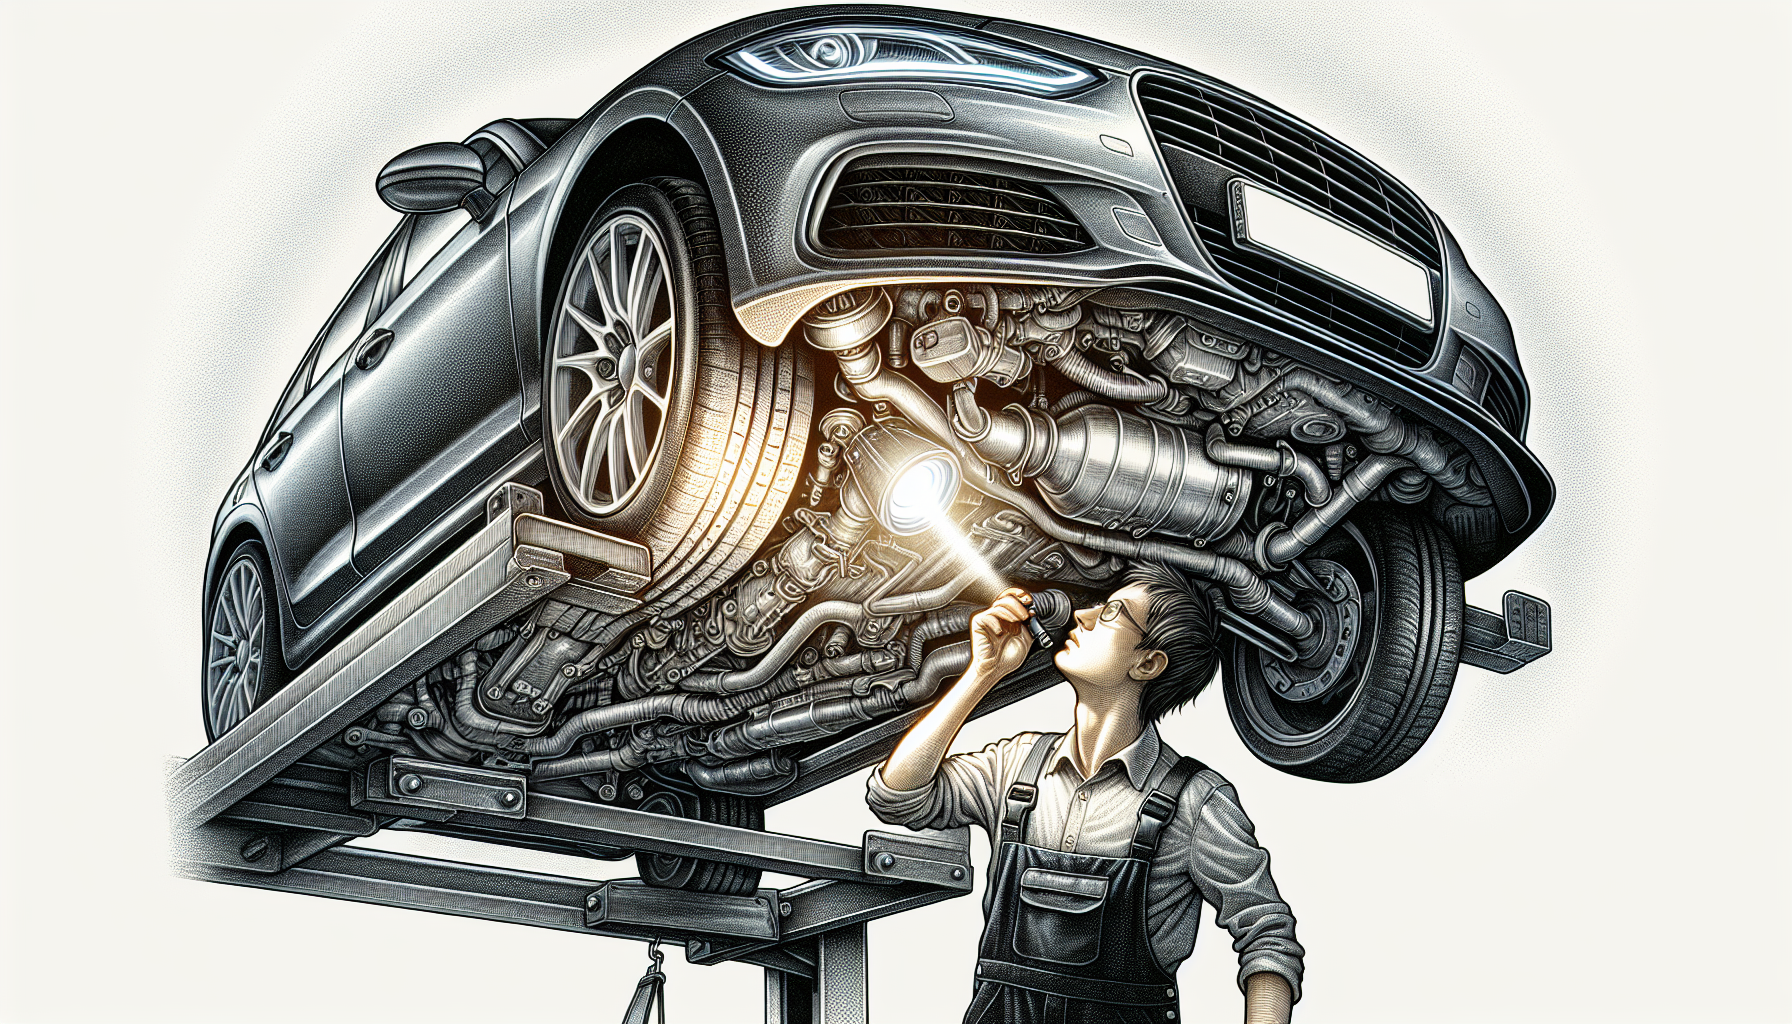 Illustration of a car on a lift with a mechanic inspecting the catalytic converter